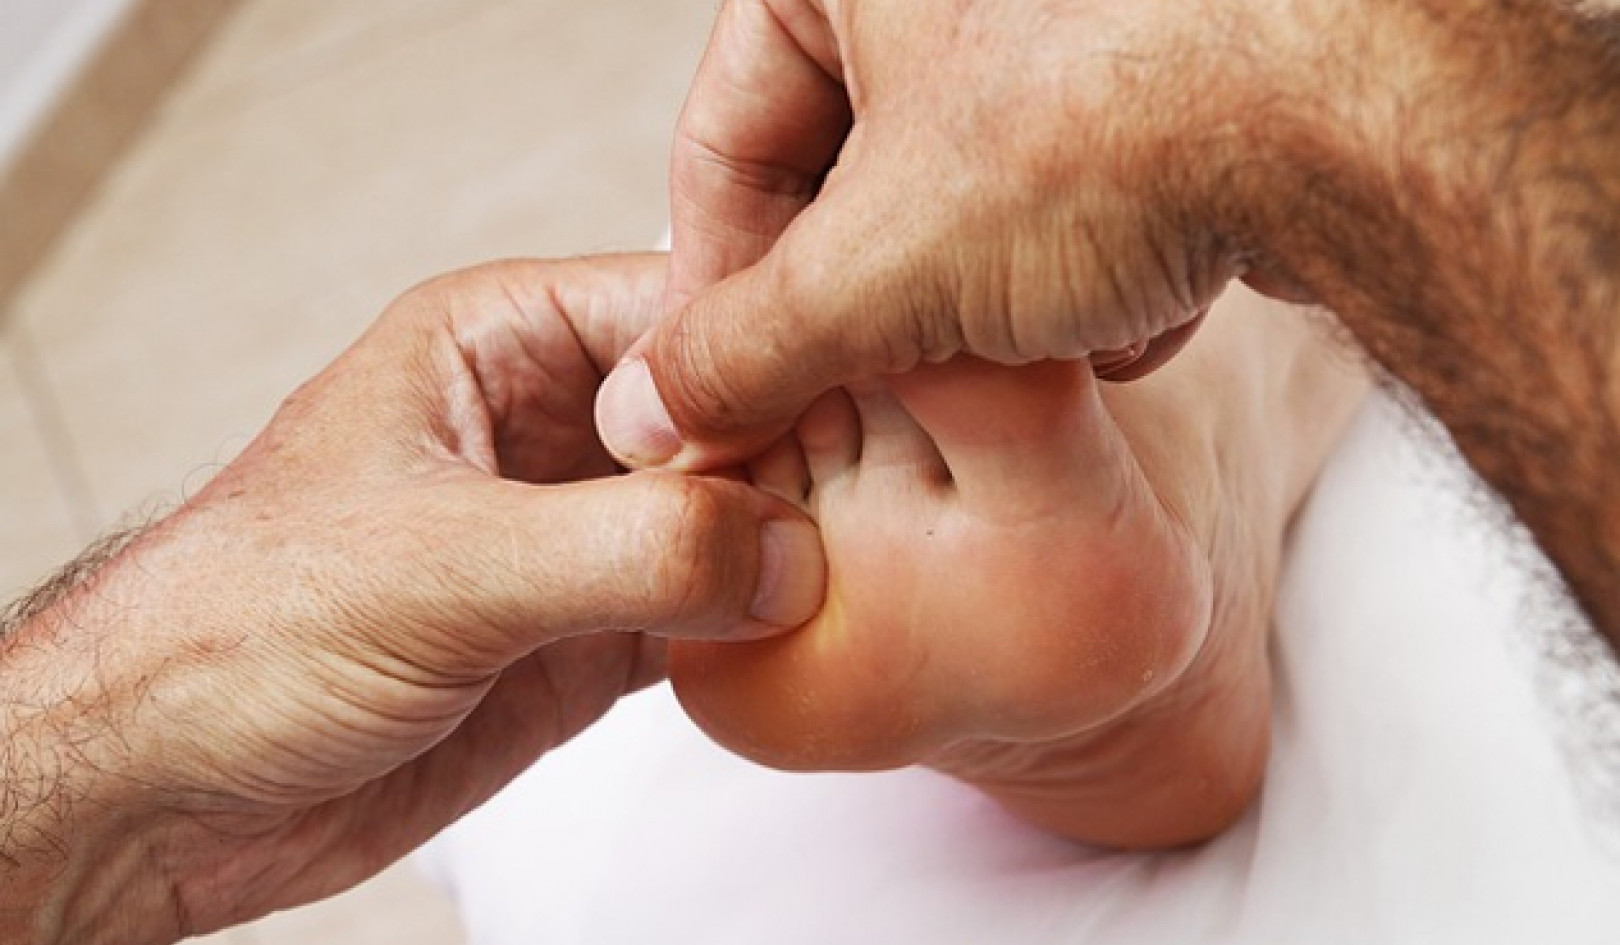 Foot Reflexology as a Do-It-Yourself Lymphatic Cleanse